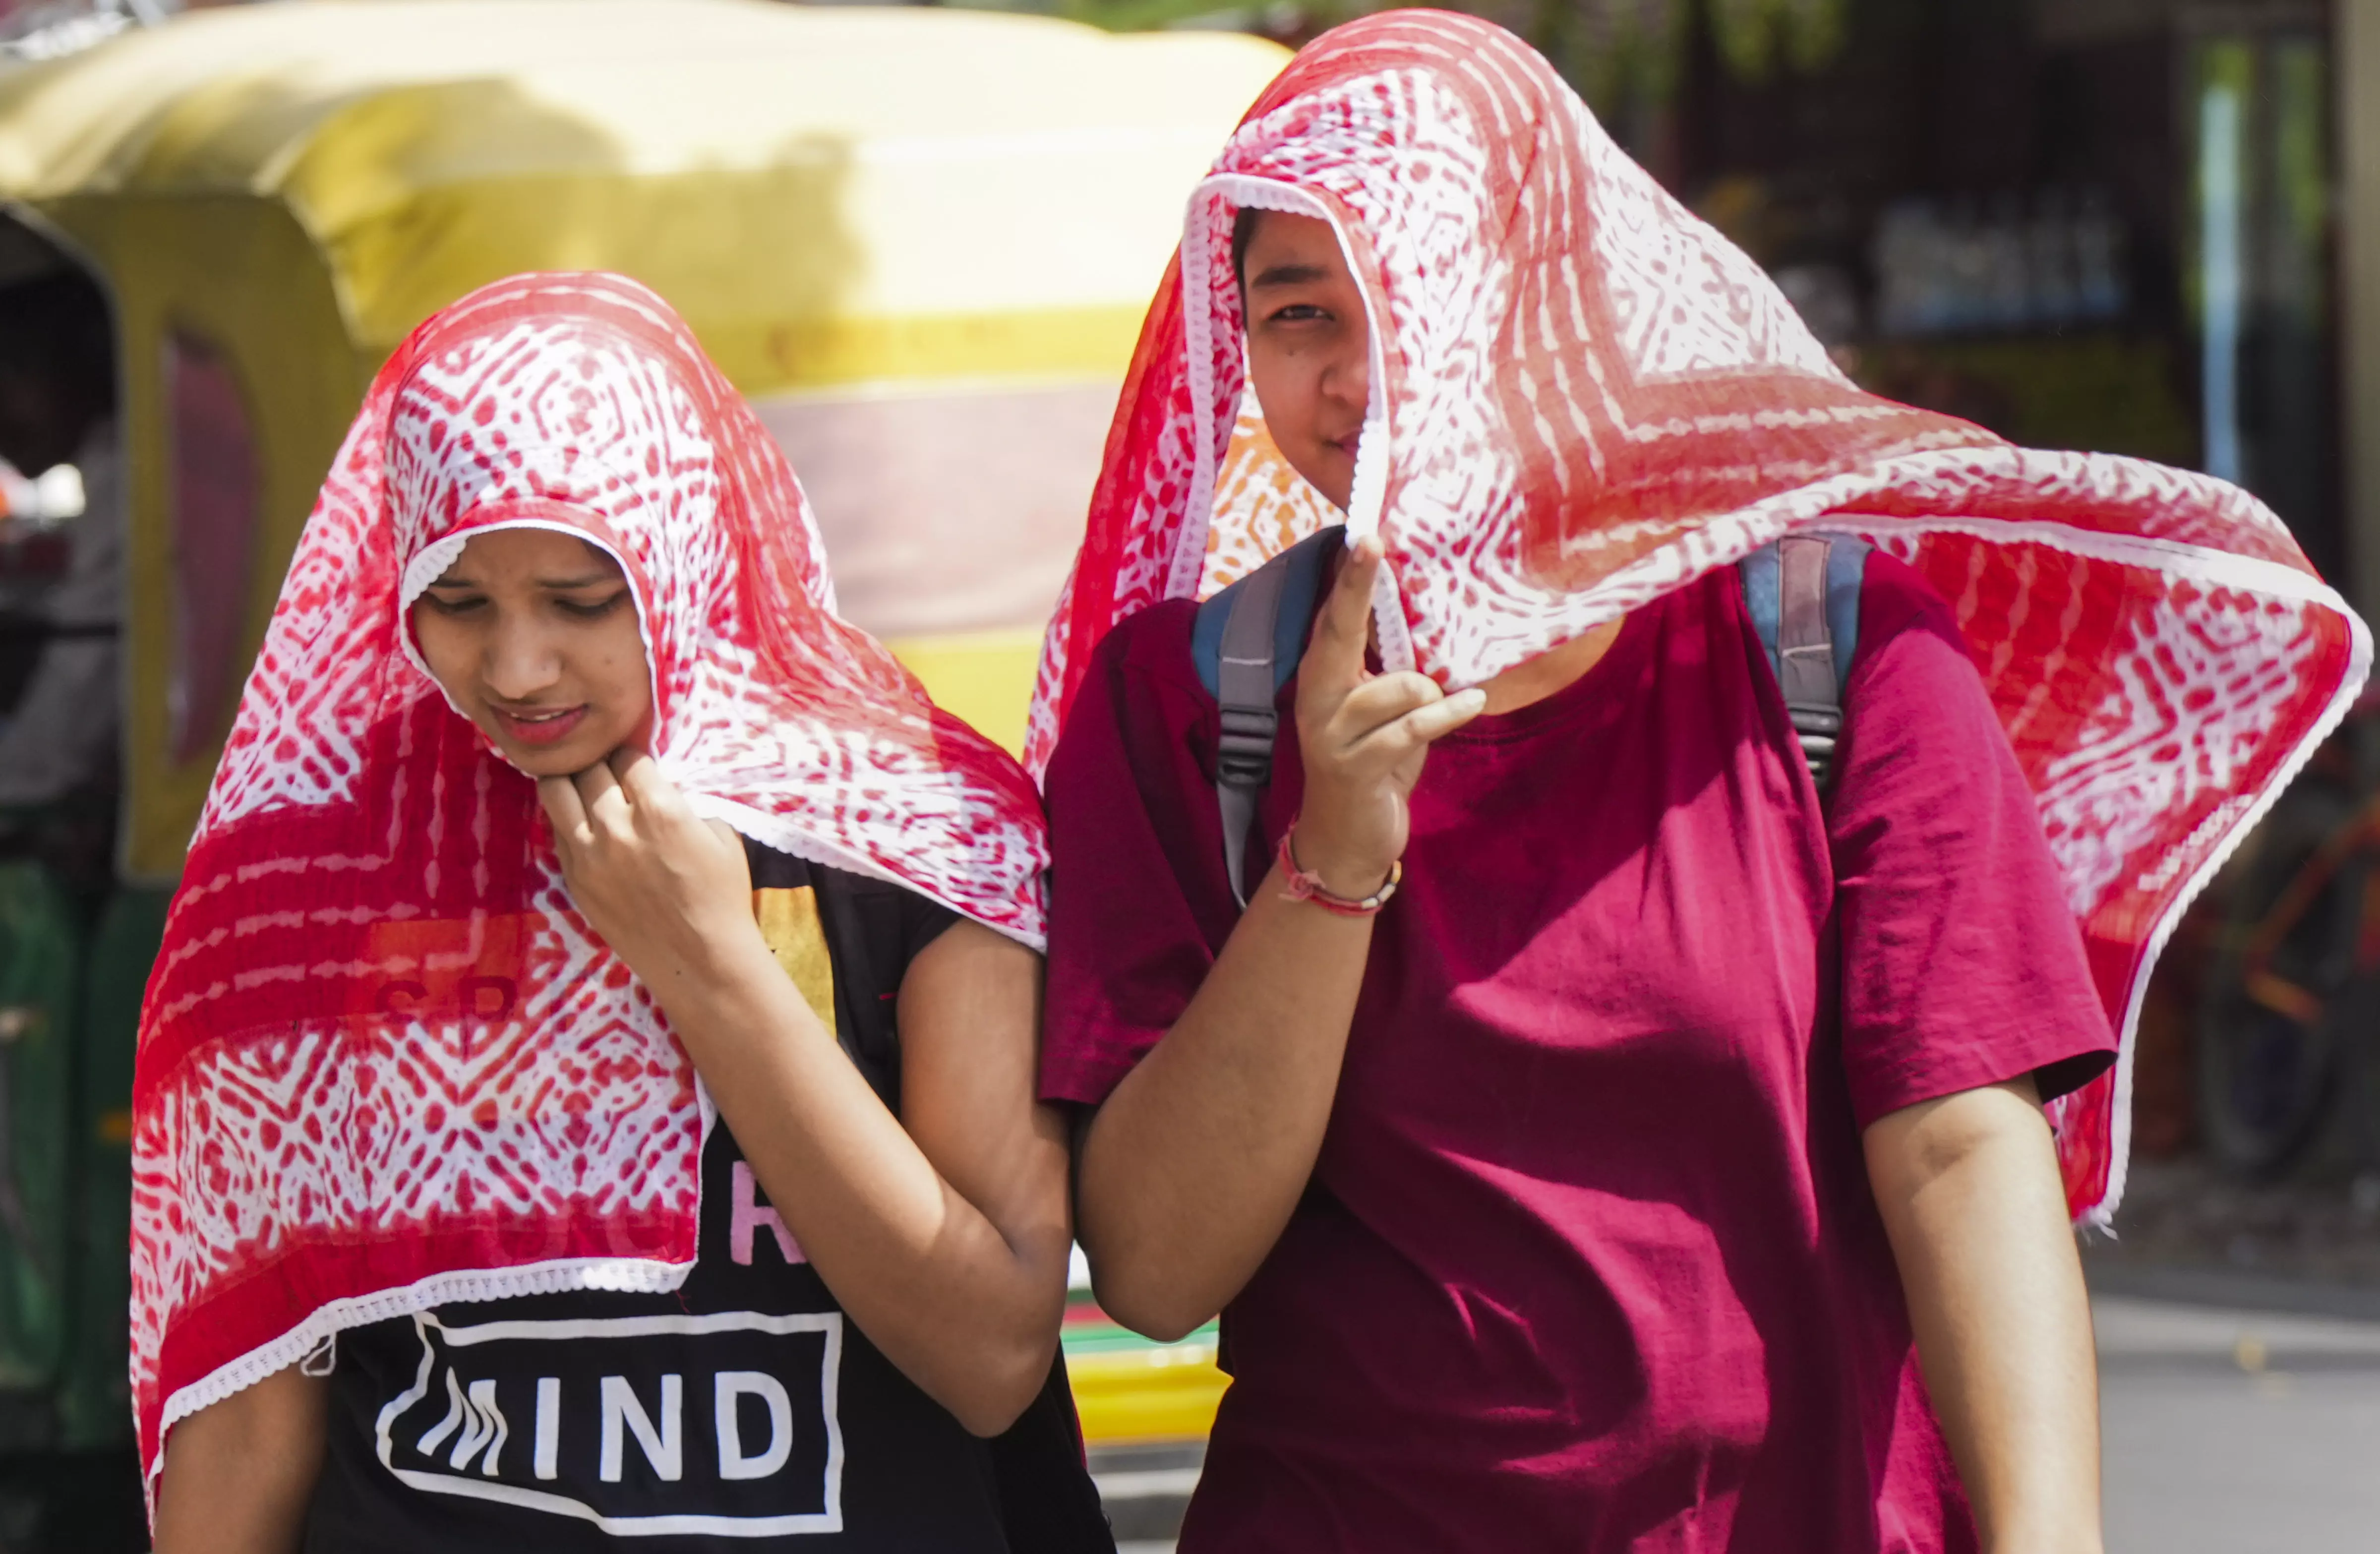 Heat wave to continue: IMD issues red alert across north India for next 5 days